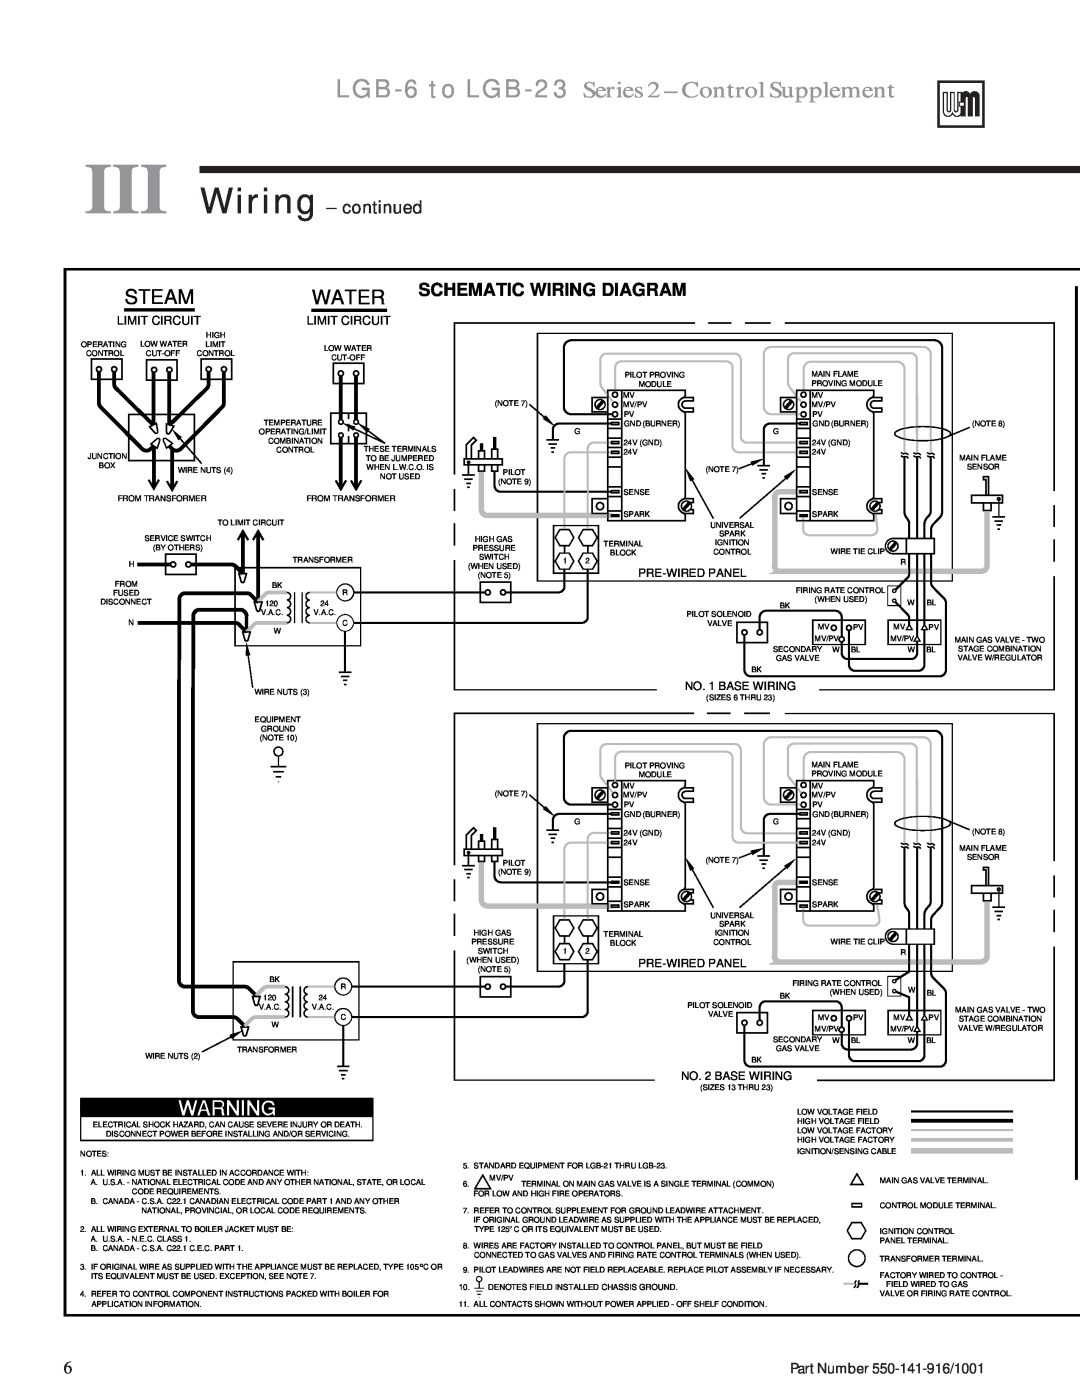 Weil-McLain manual III Wiring - continued, LGB-6to LGB-23 Series 2 - Control Supplement, Steam, Water, Limit Circuit 